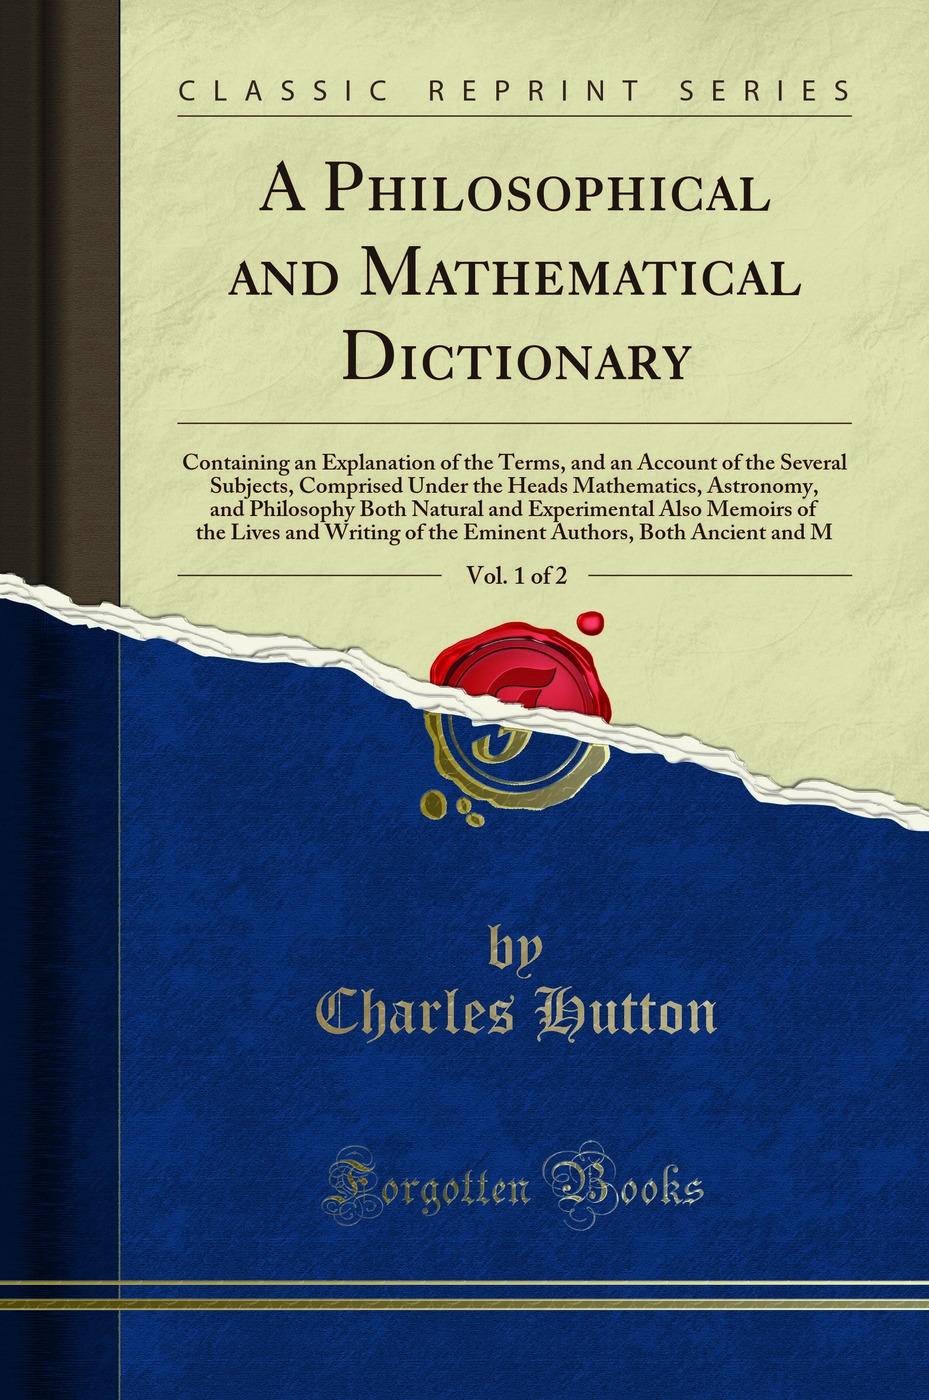 A Philosophical and Mathematical Dictionary, Vol. 1 of 2 (Classic Reprint) - Charles Hutton